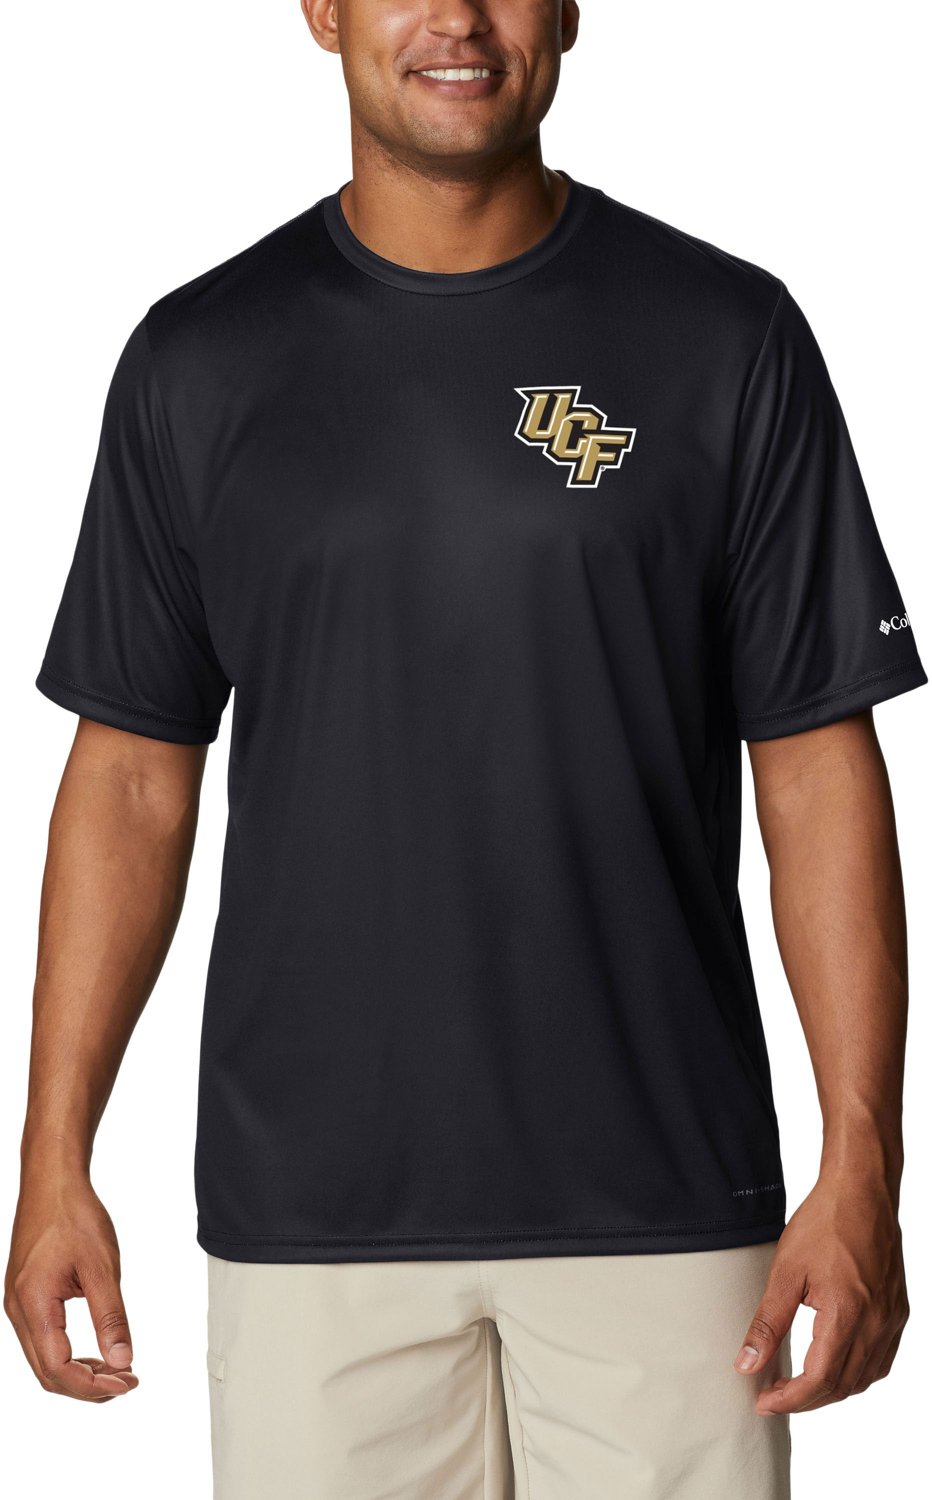 Academy Sports + Outdoors Columbia Sportswear Men's University of Central  Florida Terminal Tackle T-shirt